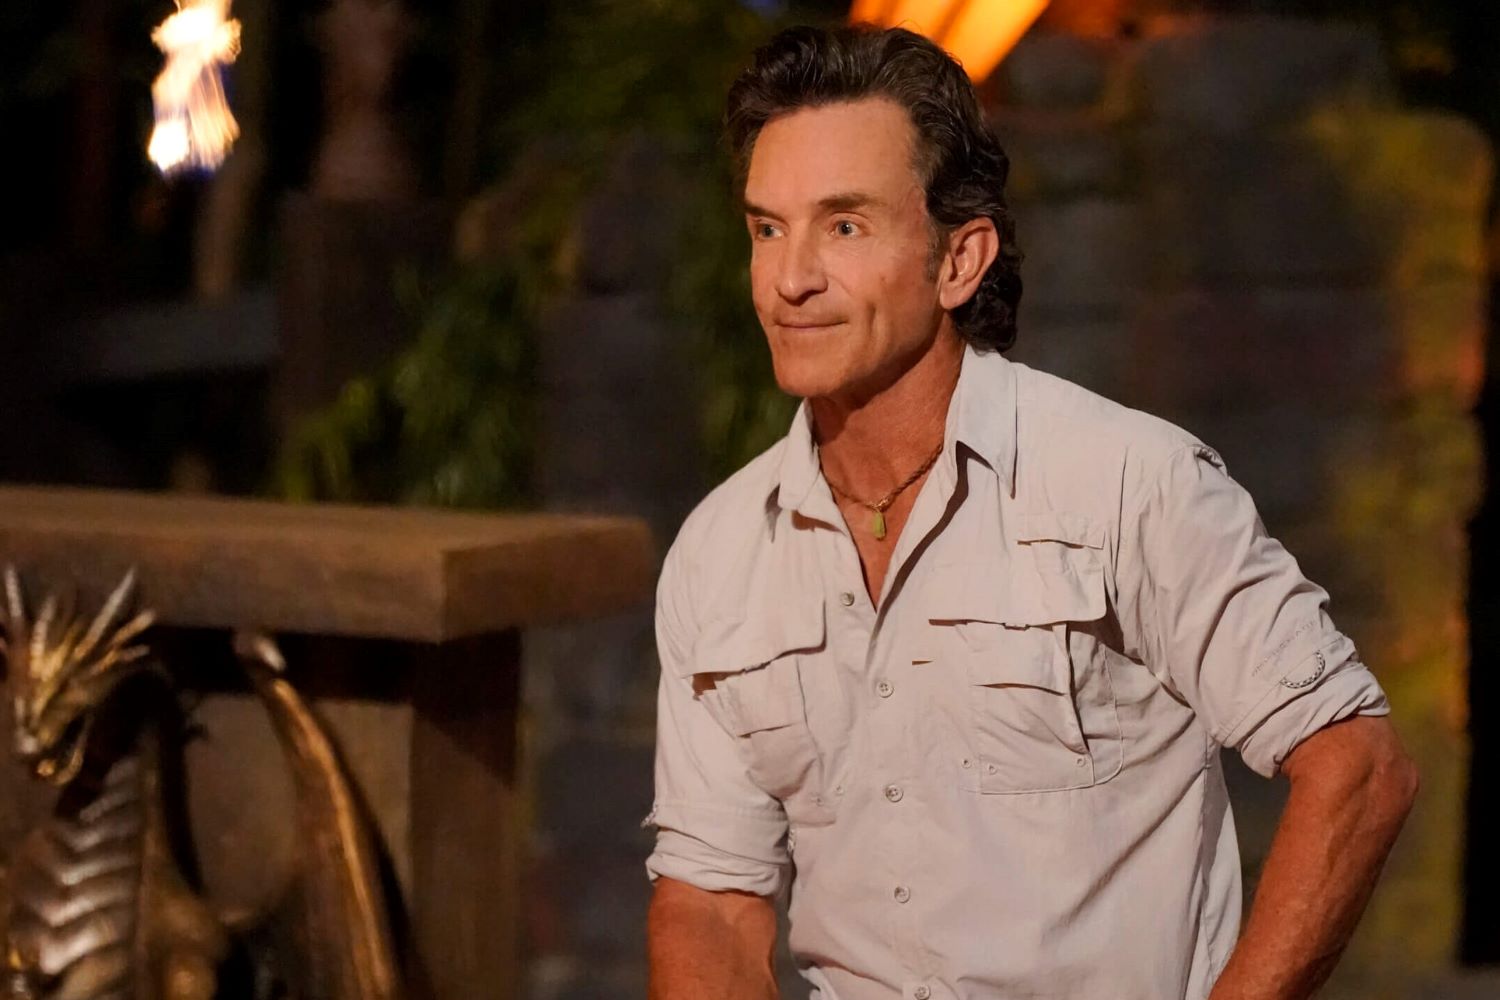 Jeff Probst, who hosts 'Survivor 44' and its finale on CBS, wears a light gray button-up shirt with rolled-up sleeves at Tribal Council.